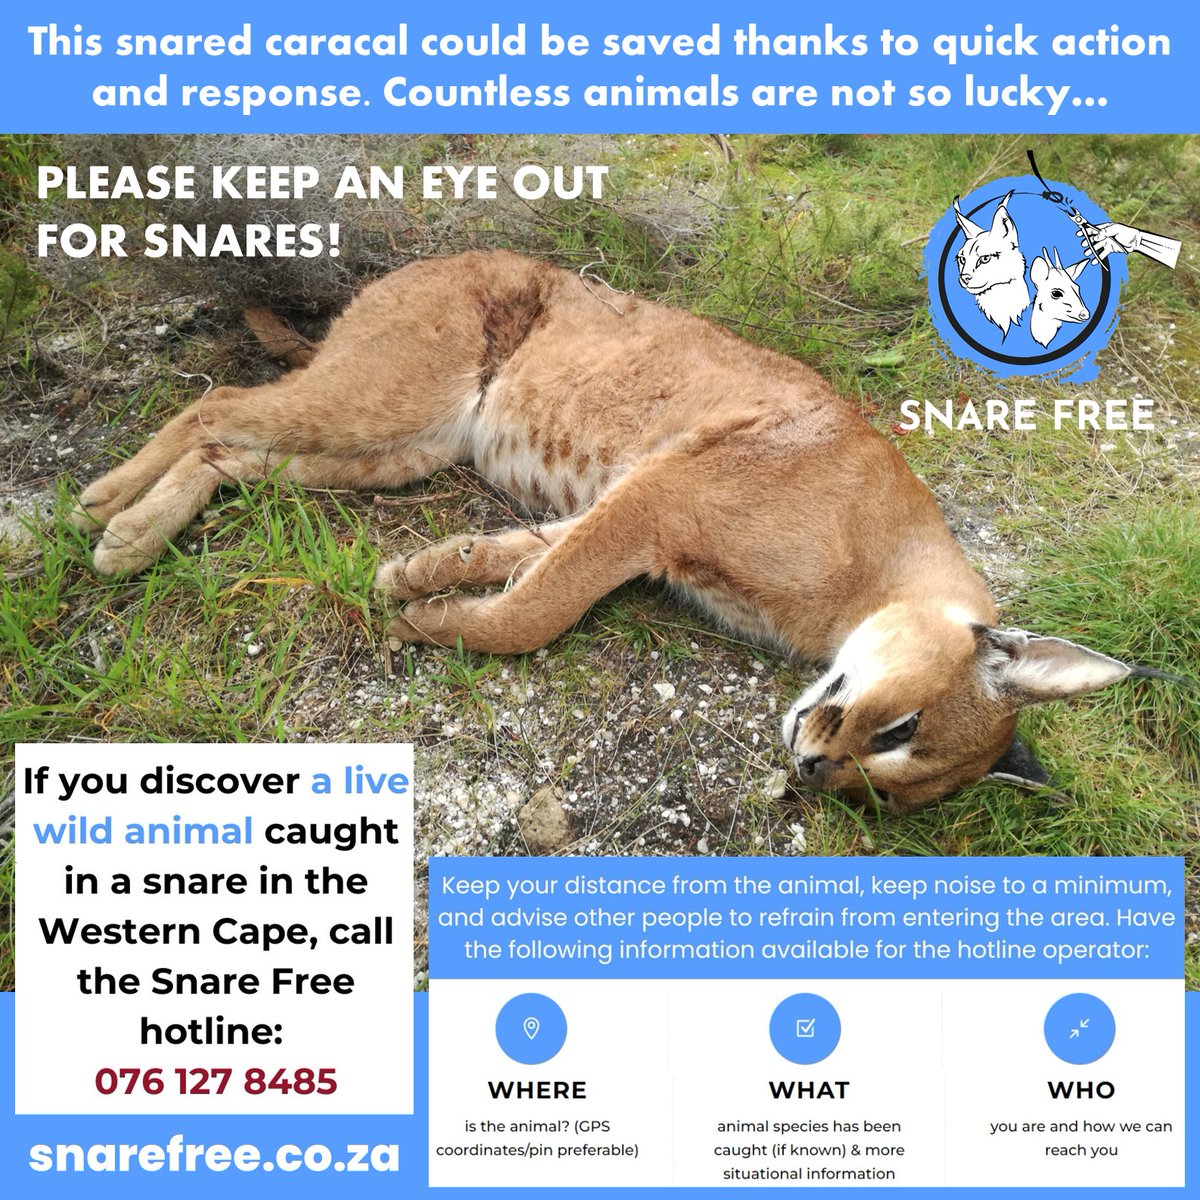 Today is #WorldWildlifeConservationDay &the @Cape_Leopard Trust has a special #CallToAction to PLEASE BE #SNARE AWARE, especially as we enter the festive season.
Read more linkedin.com/feed/update/ur…
#WorldWildlifeConservationDay2023 #WildlifeConservationDay #SnareFree #SnareAware